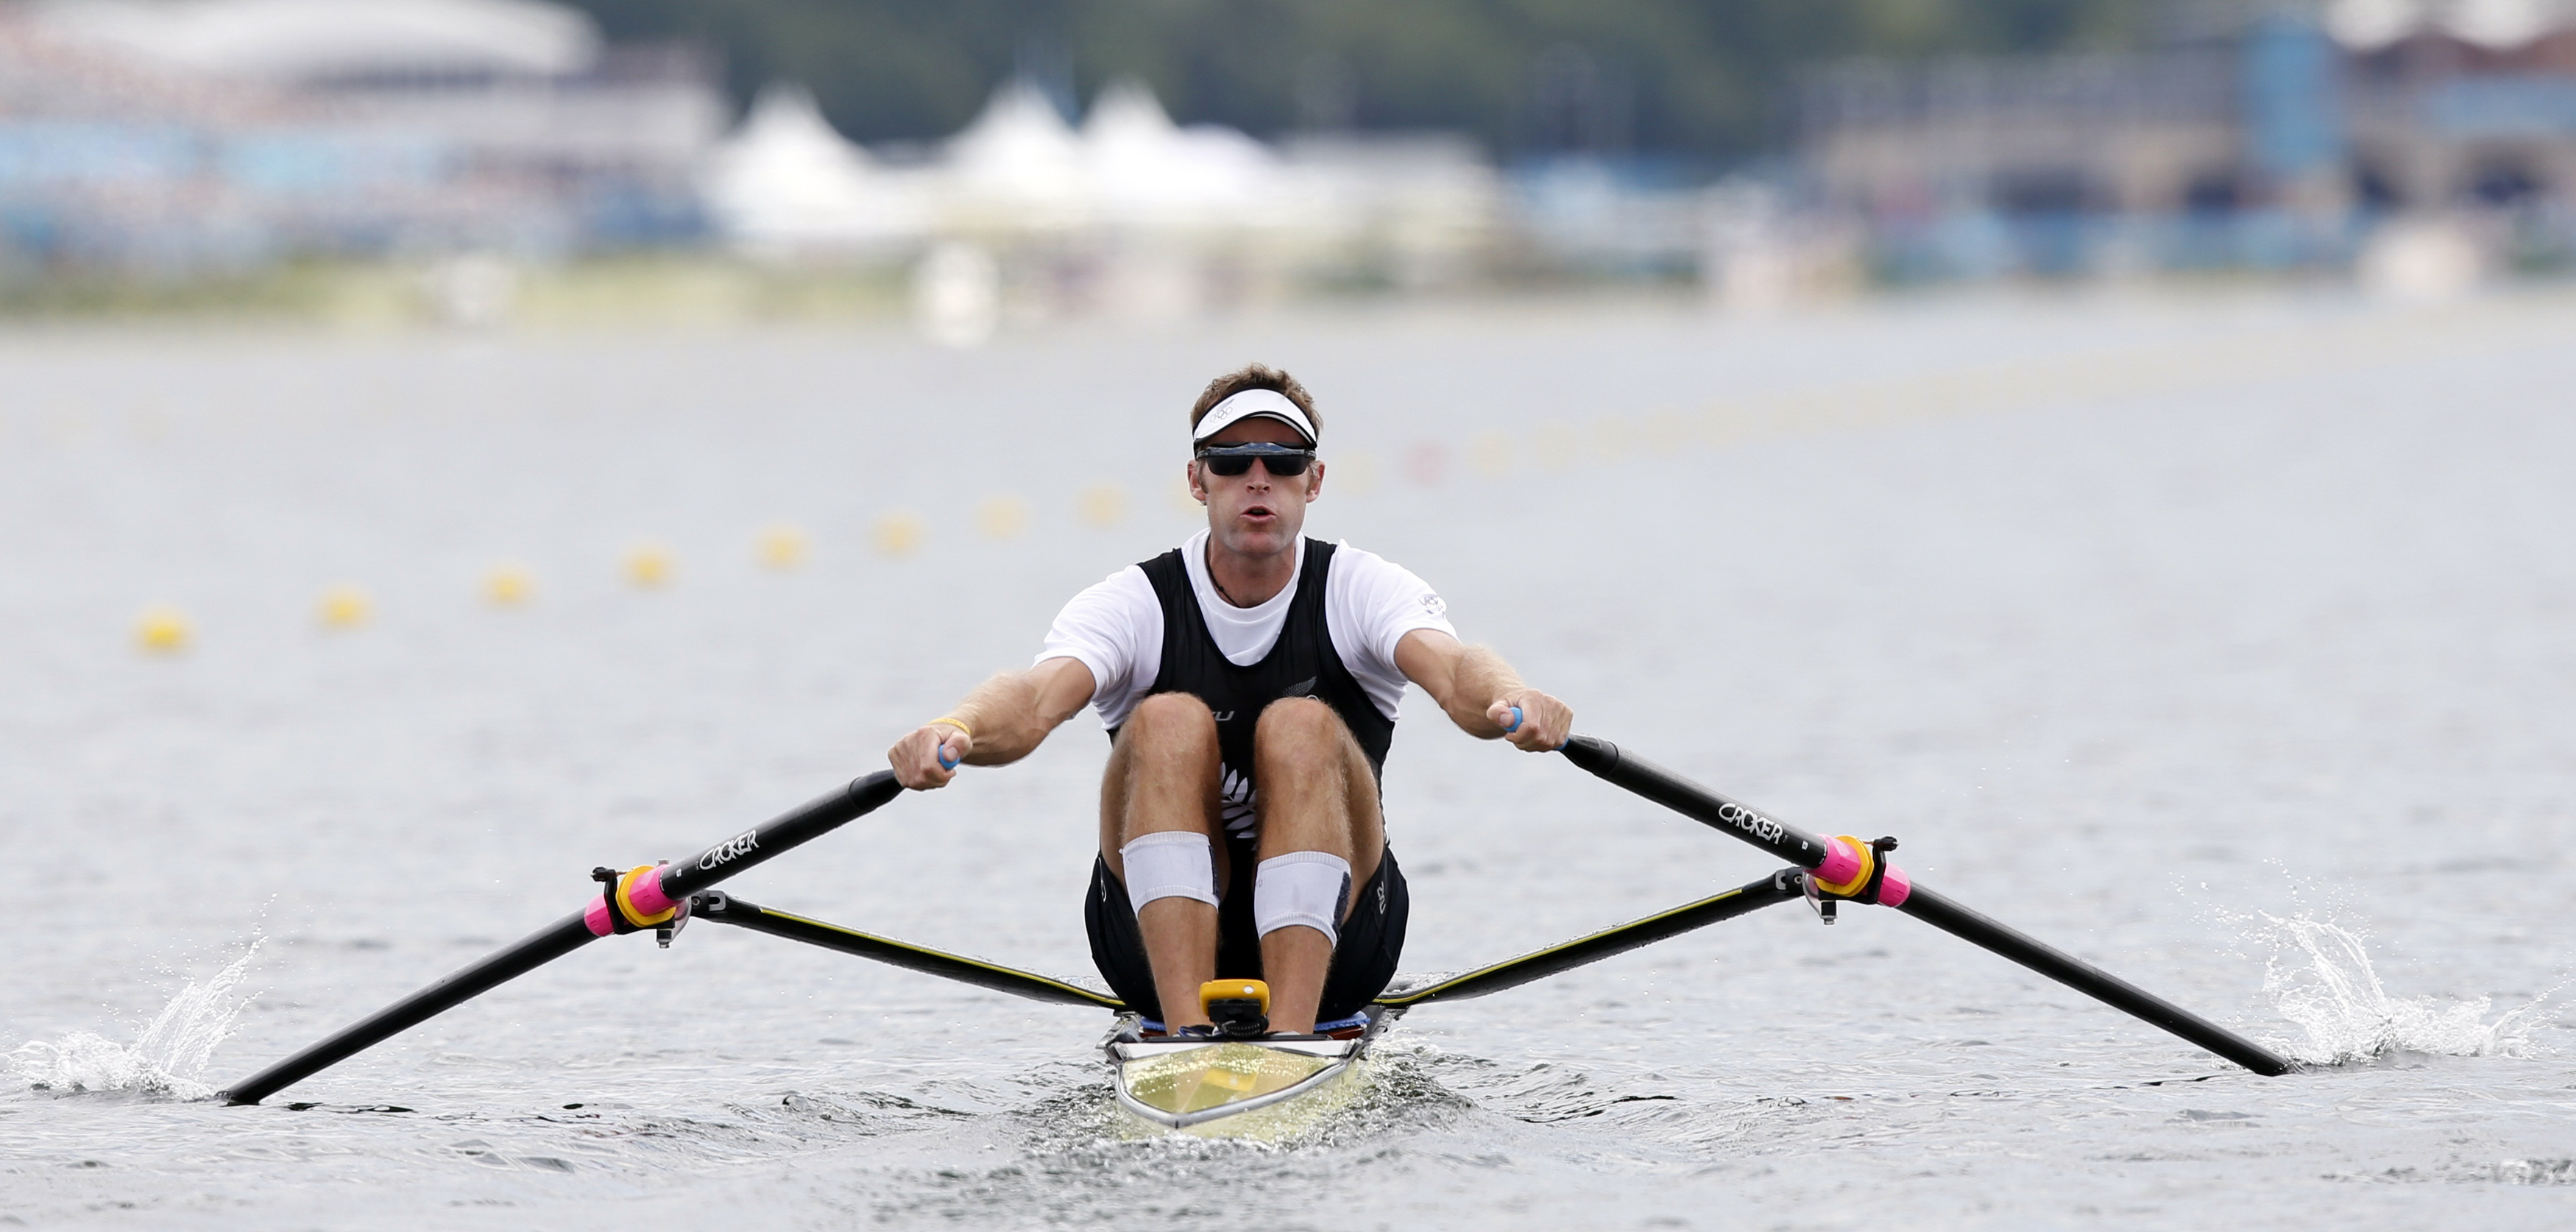 New Zealand's Mahe Drysdale rows during the men's rowing single sculls heat at the Eton Dorney during the London 2012 Olympic Games